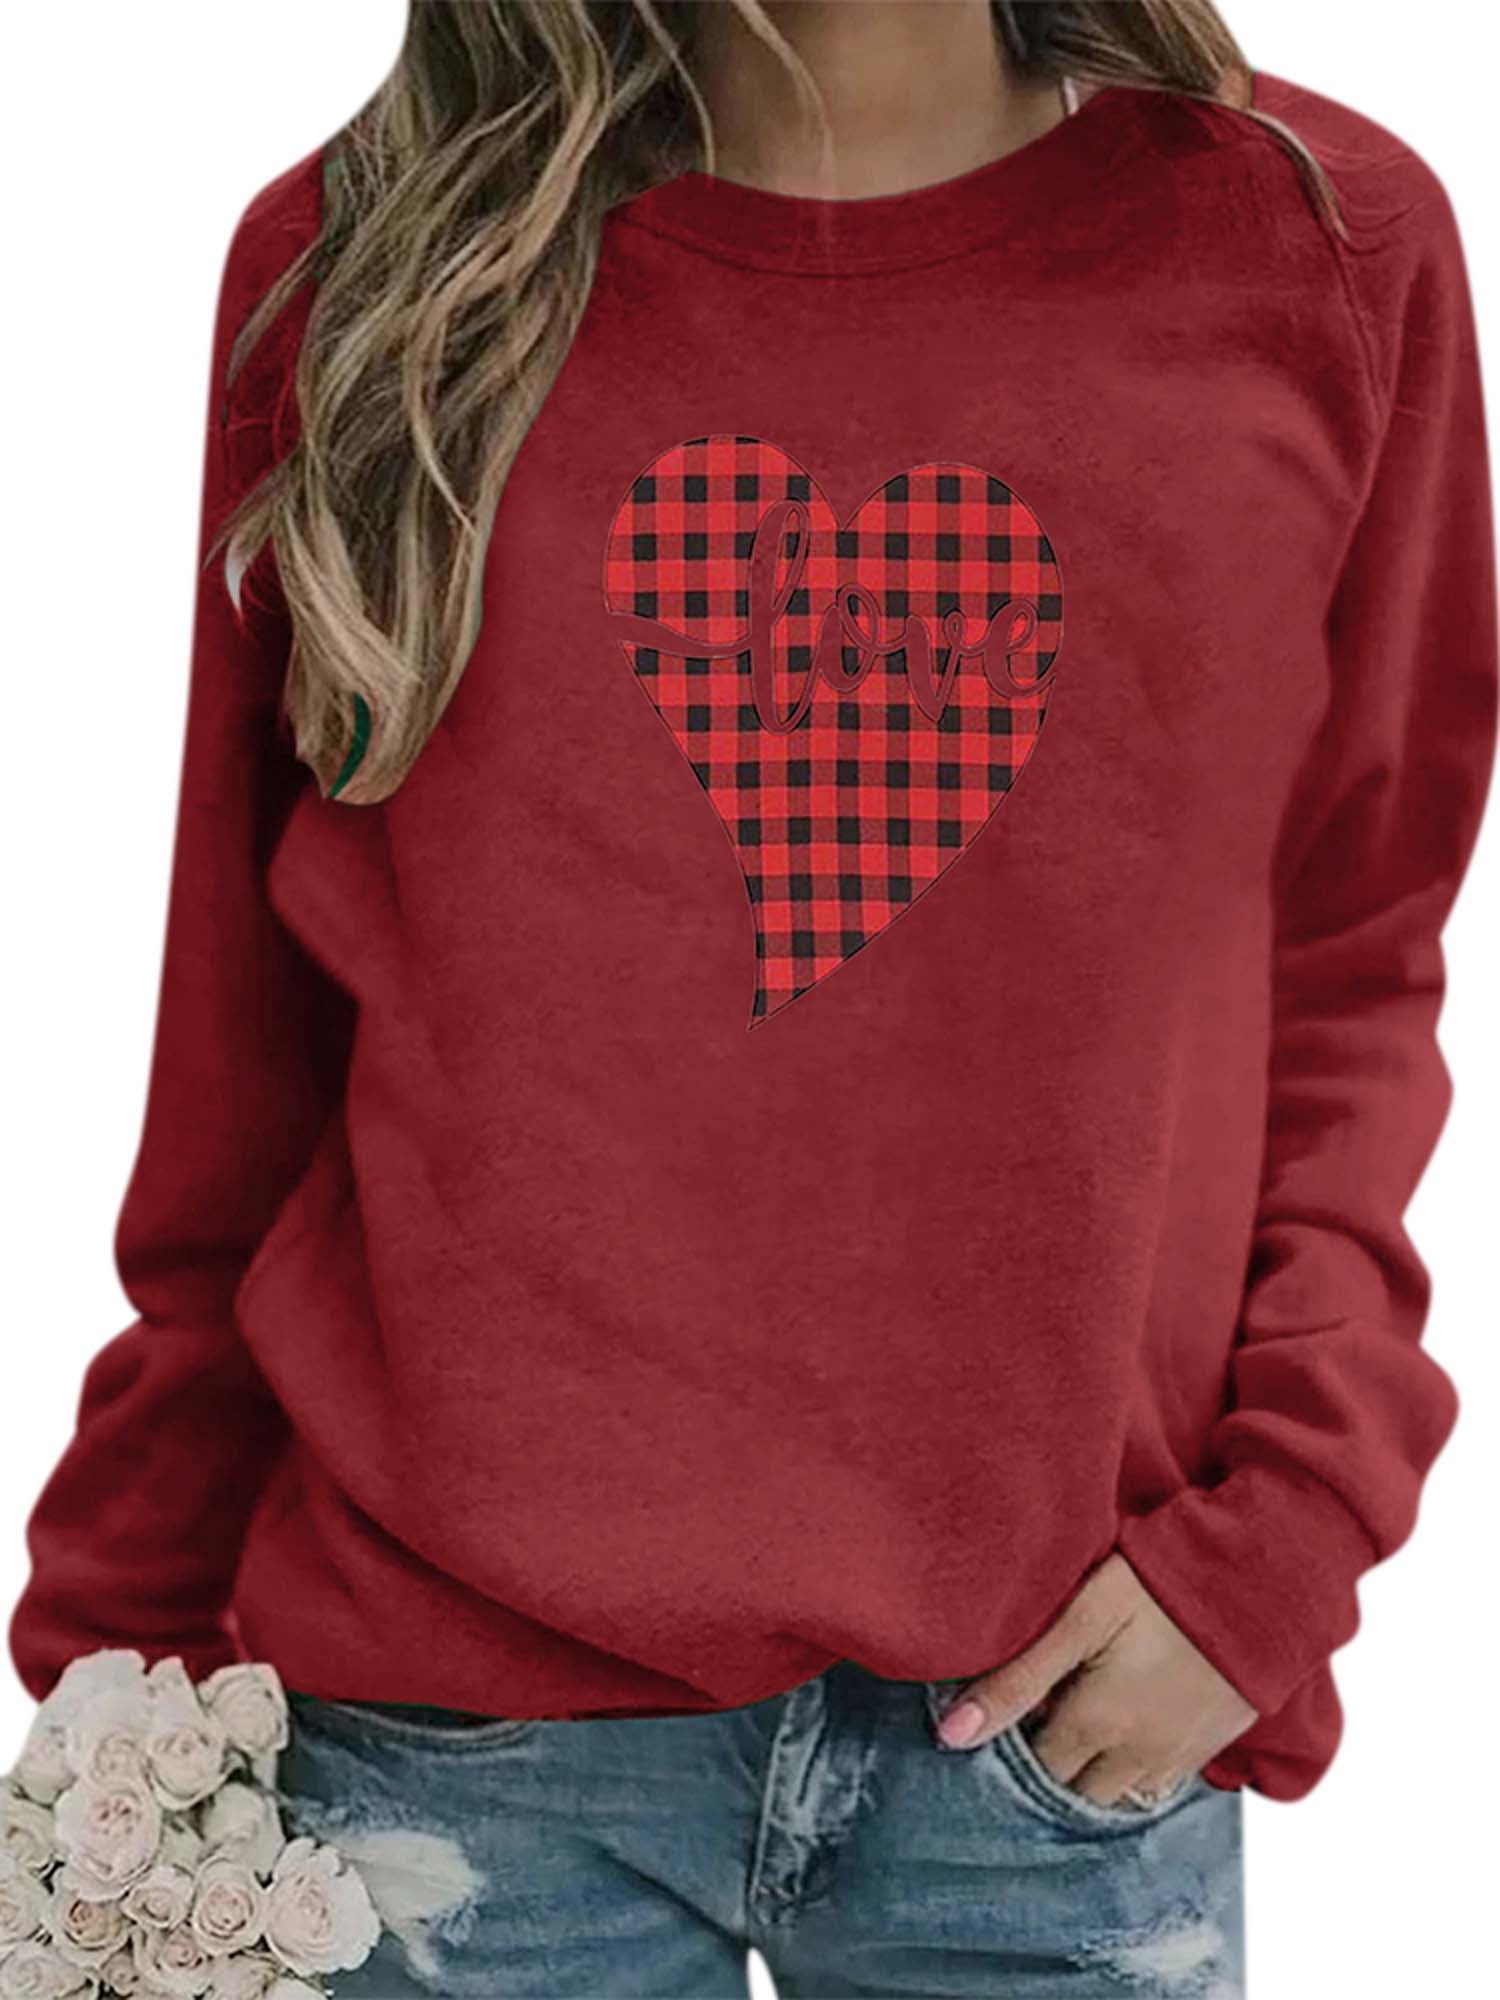 Valentines Day Hearts Tee Shirt Womens Loose Casual Blouses Top Long Sleeve O Neck Pullovers Sweatshirts Sweater Tops 